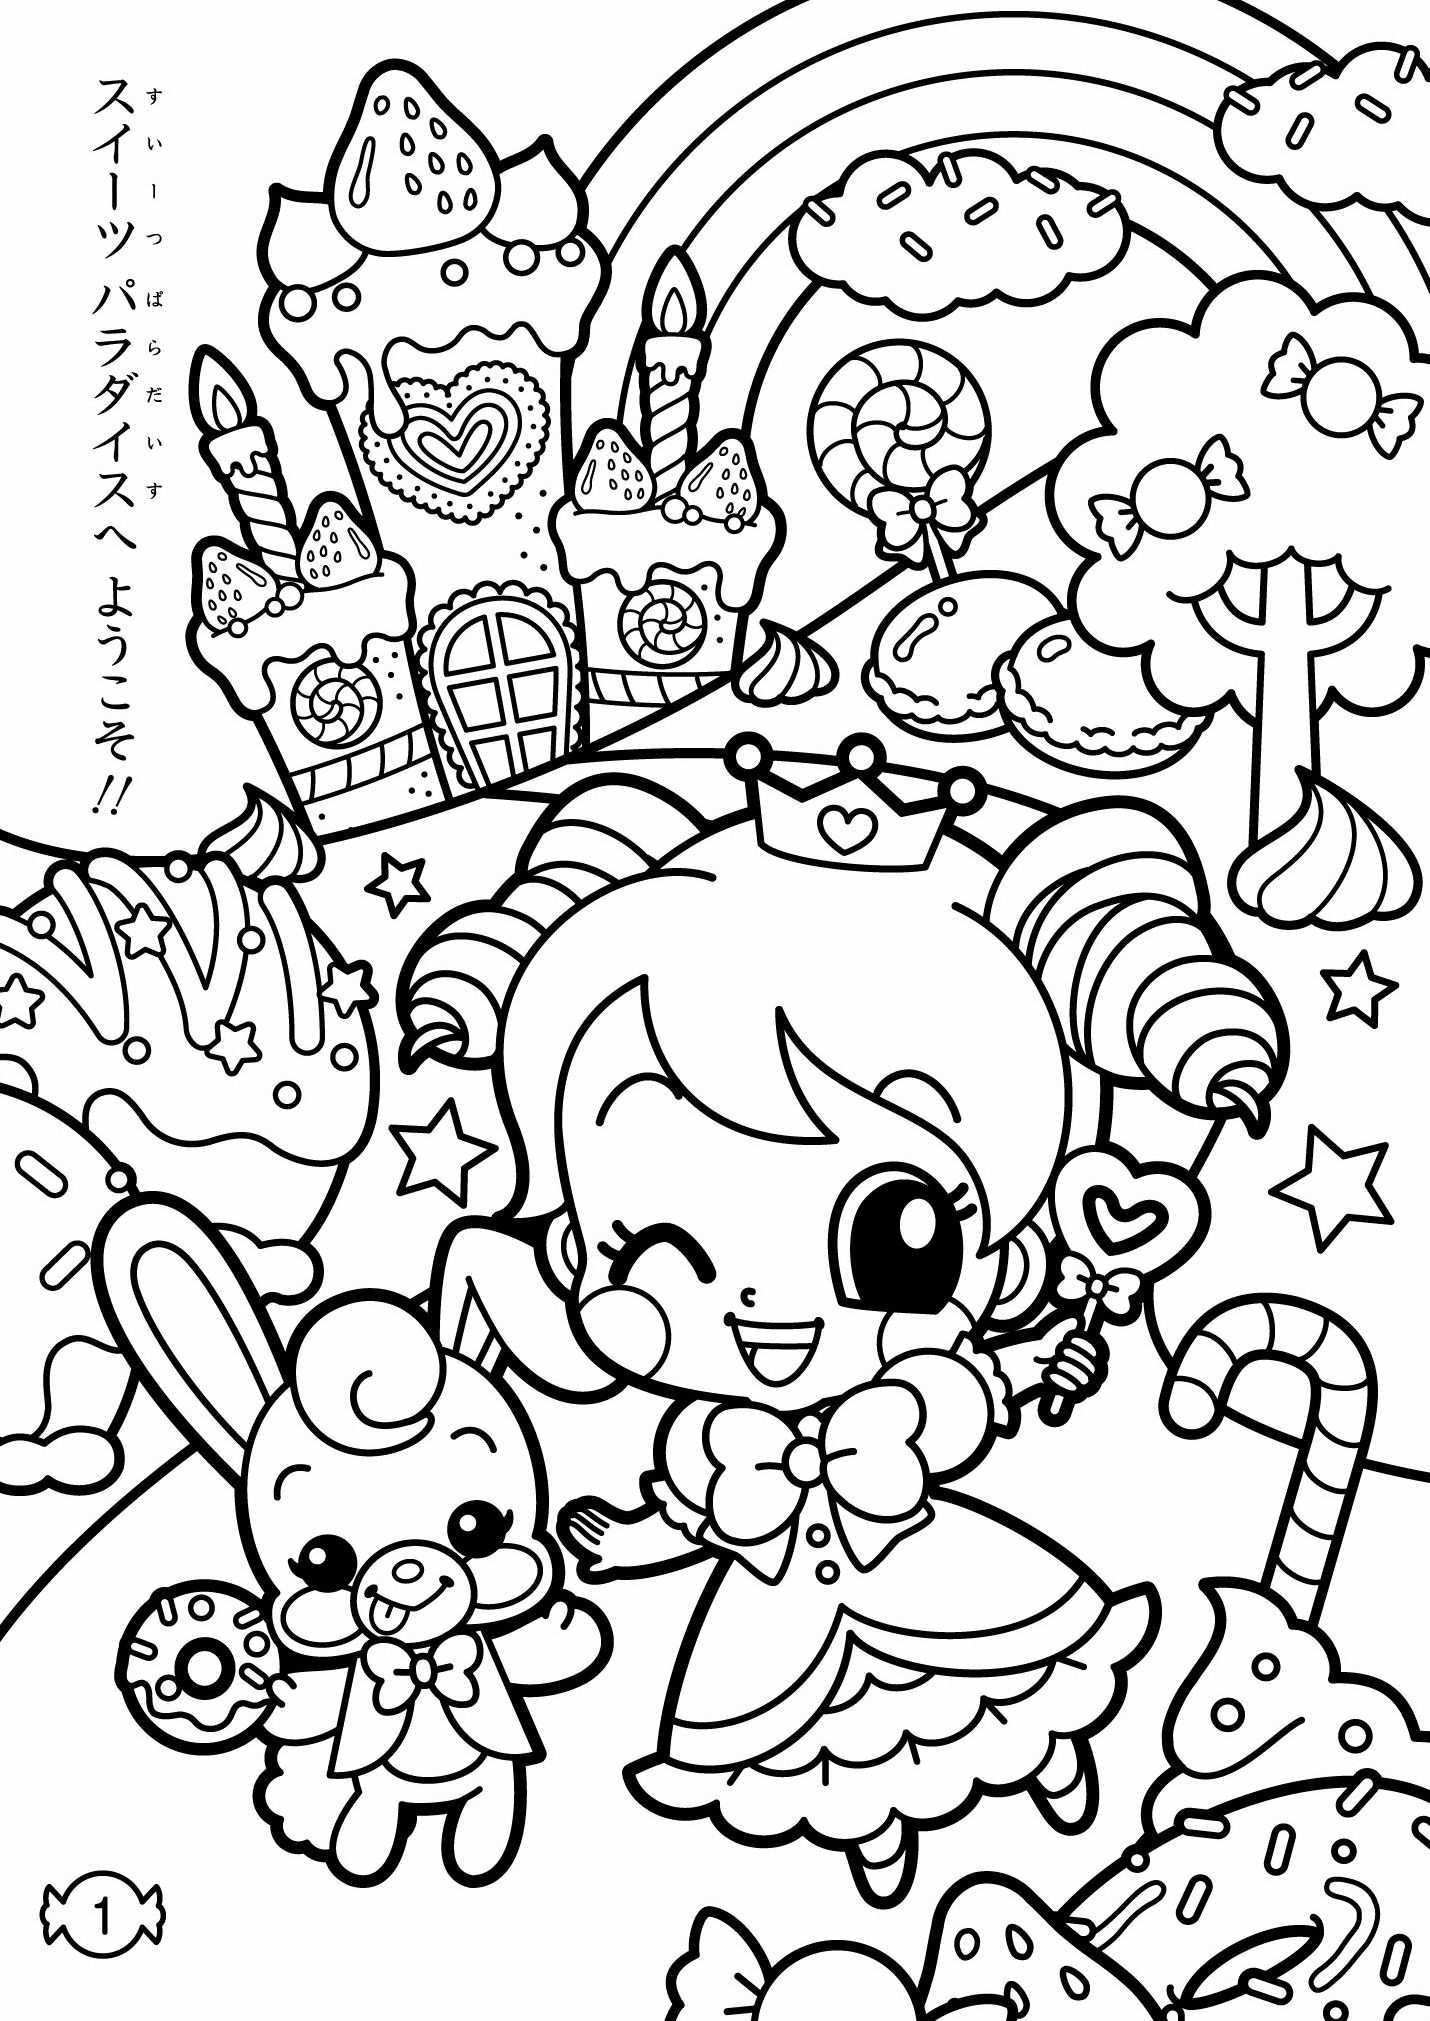 Kawaii Unicorn Coloring Pages Cute Coloring Pages Animal Coloring Pages